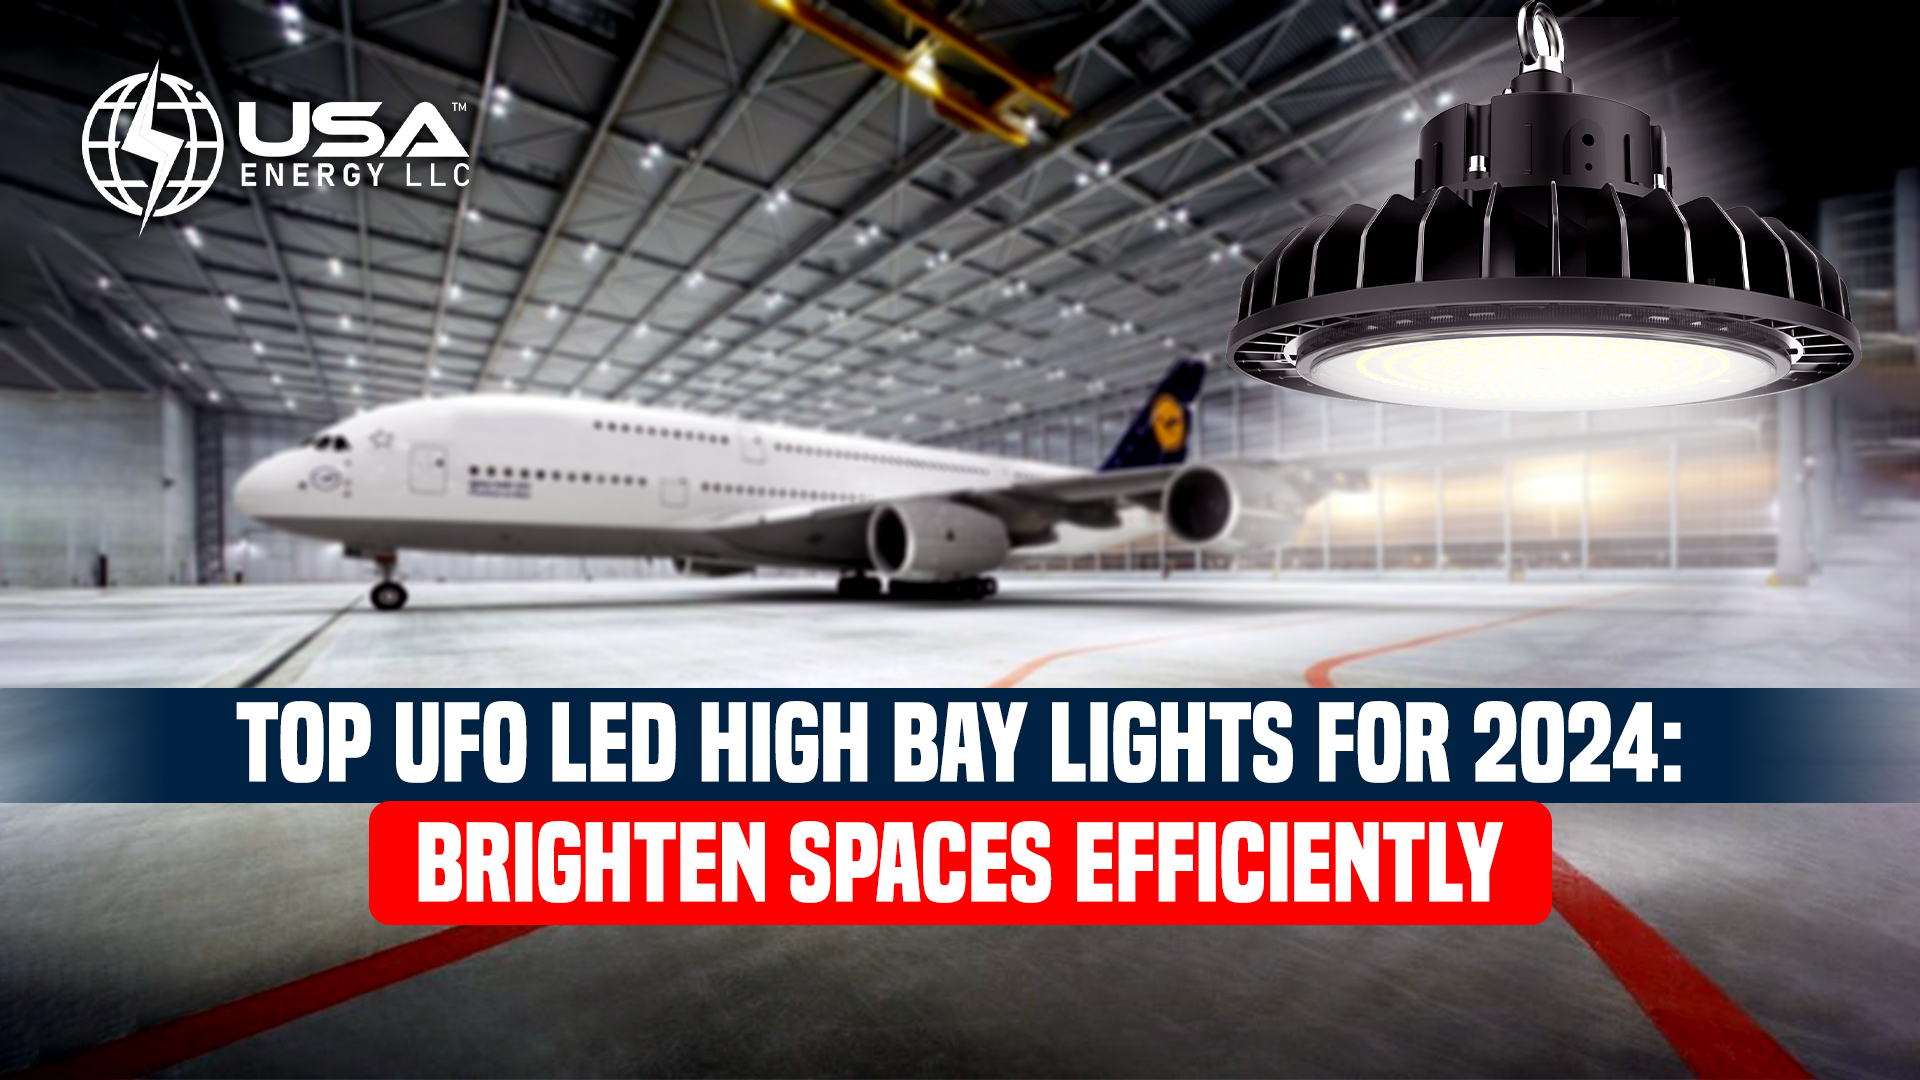 Top UFO LED High Bay Lights for 2024: Brighten Spaces Efficiently